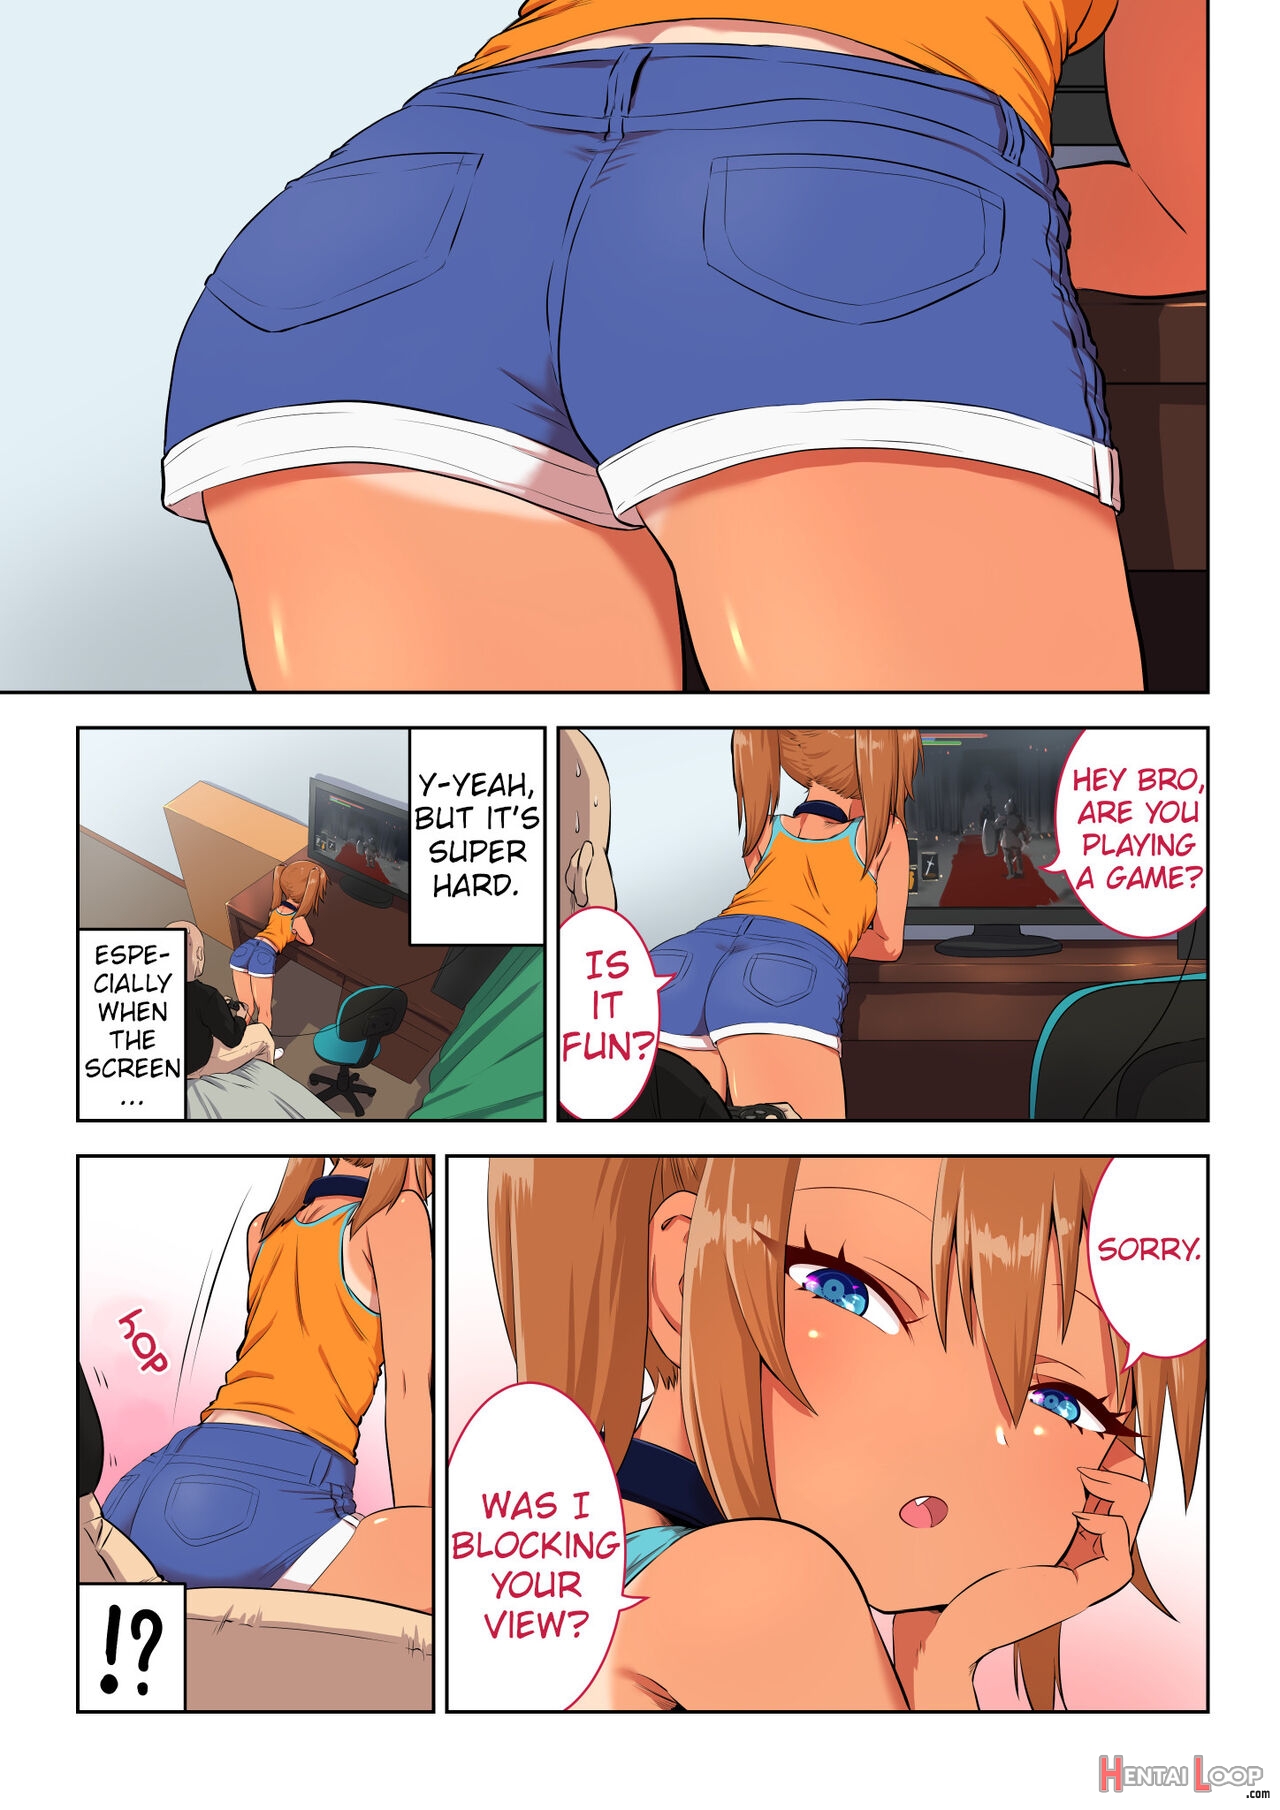 When I Was Playing A Game, A Girl Sat Between My Crotch - Read hentai  doujinshi for free at HentaiLoop